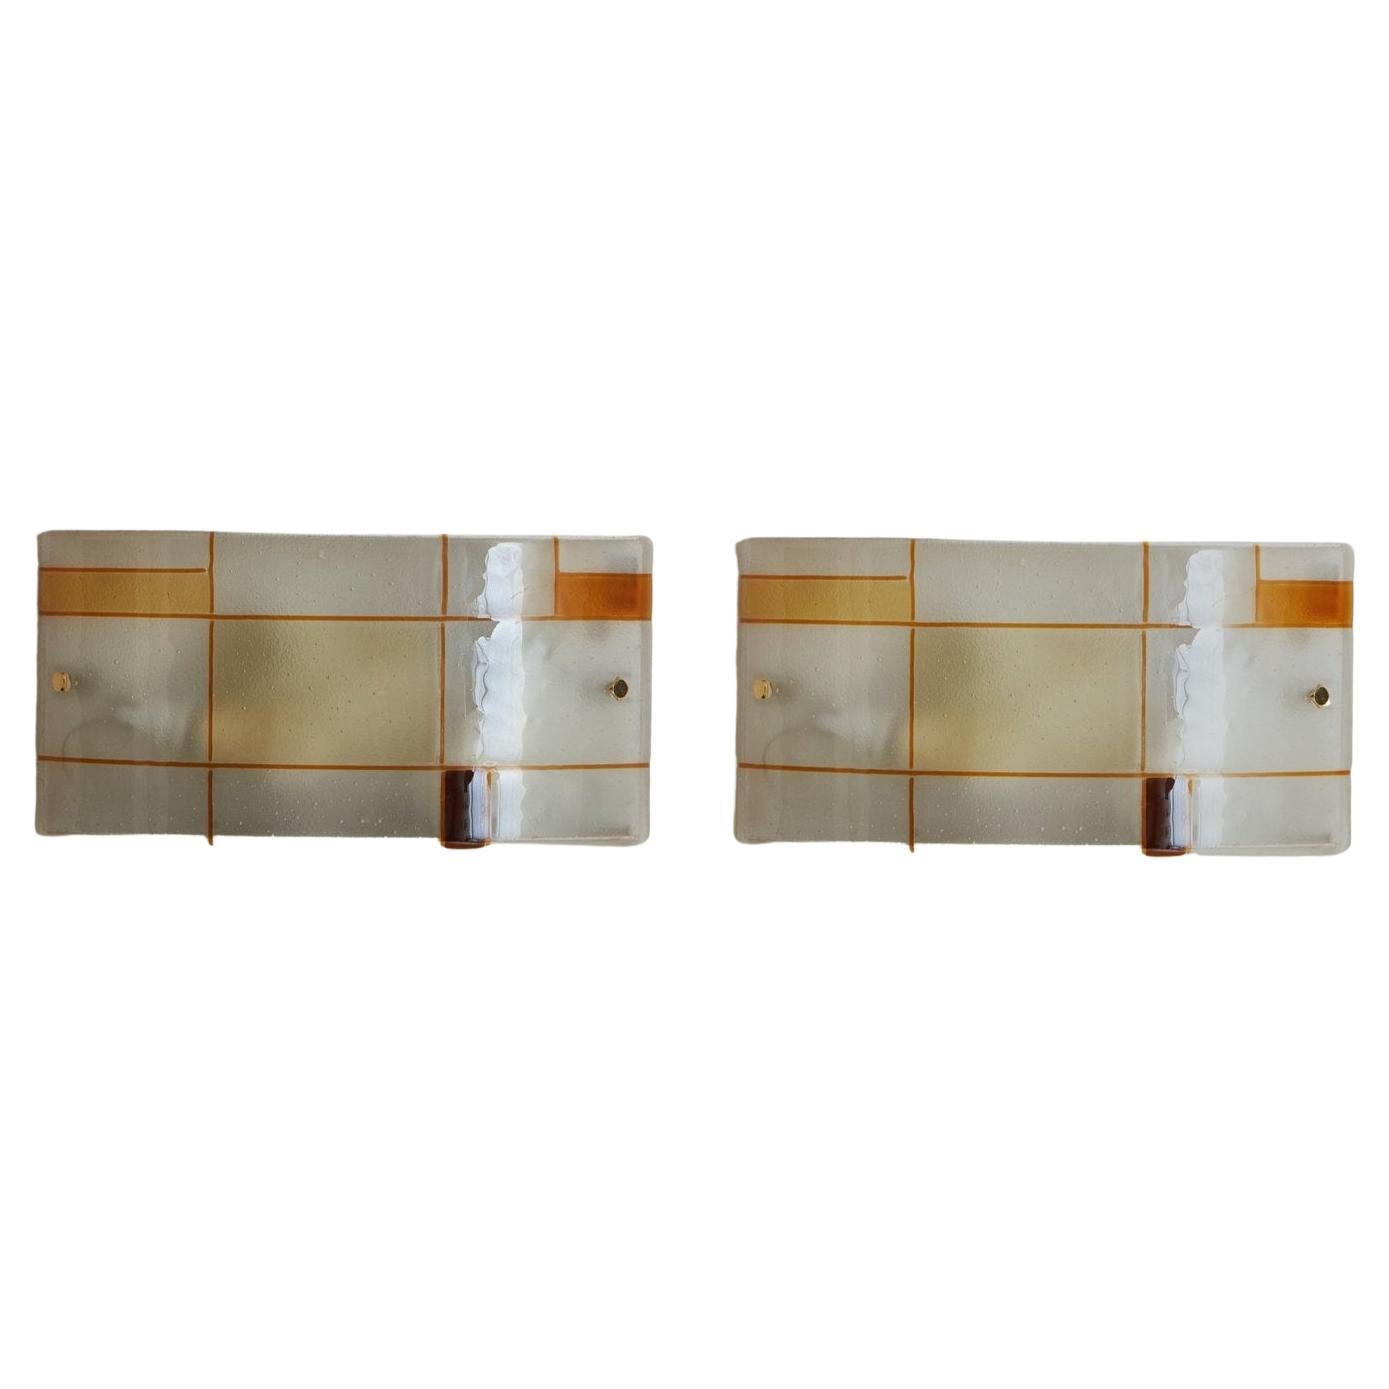 Curved Mondrian Style Murano Glass Sconce, Italy 1960s - 3 Available  For Sale